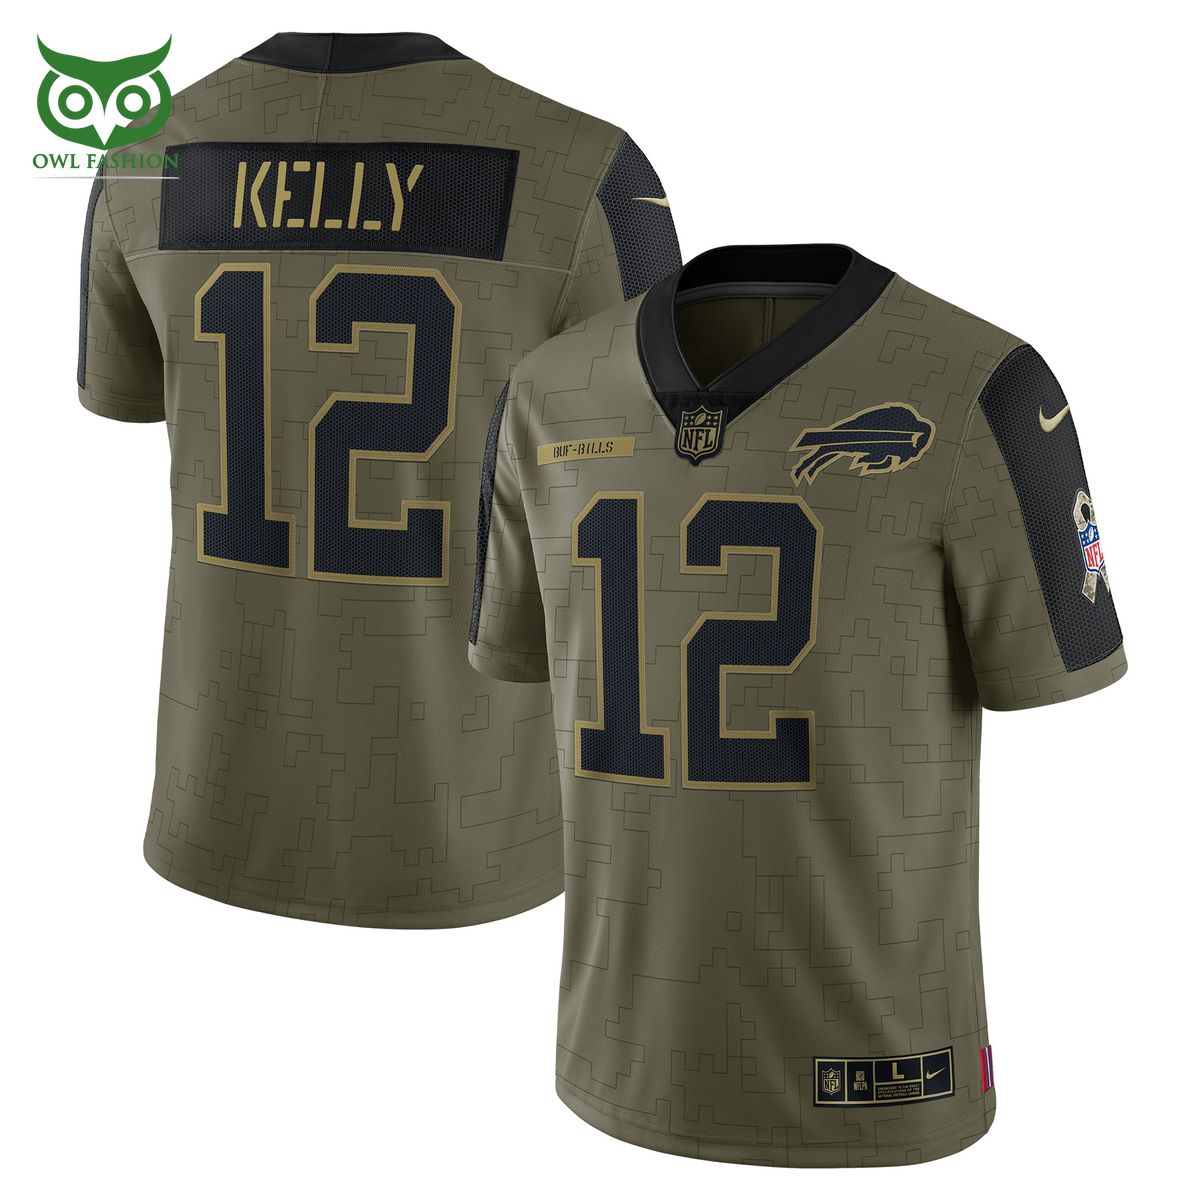 Limited Jim Kelly Buffalo Bills Nike 2021 Salute To Service Retired Player Limited Jersey Olive Shirt